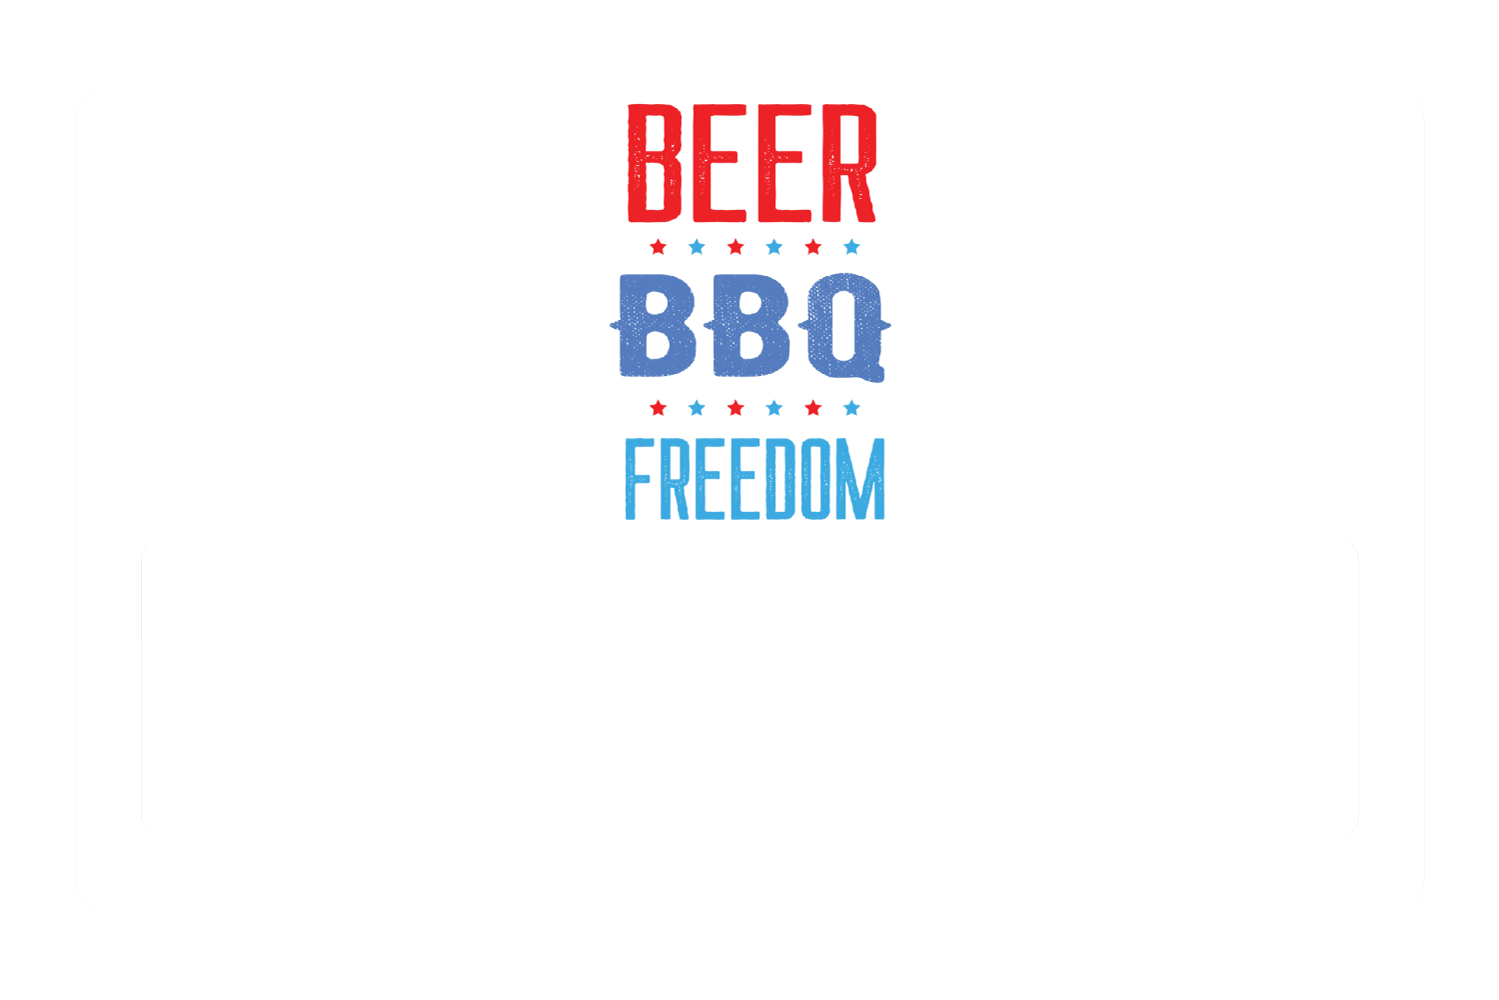 BEER, BBQ, FREEDOM